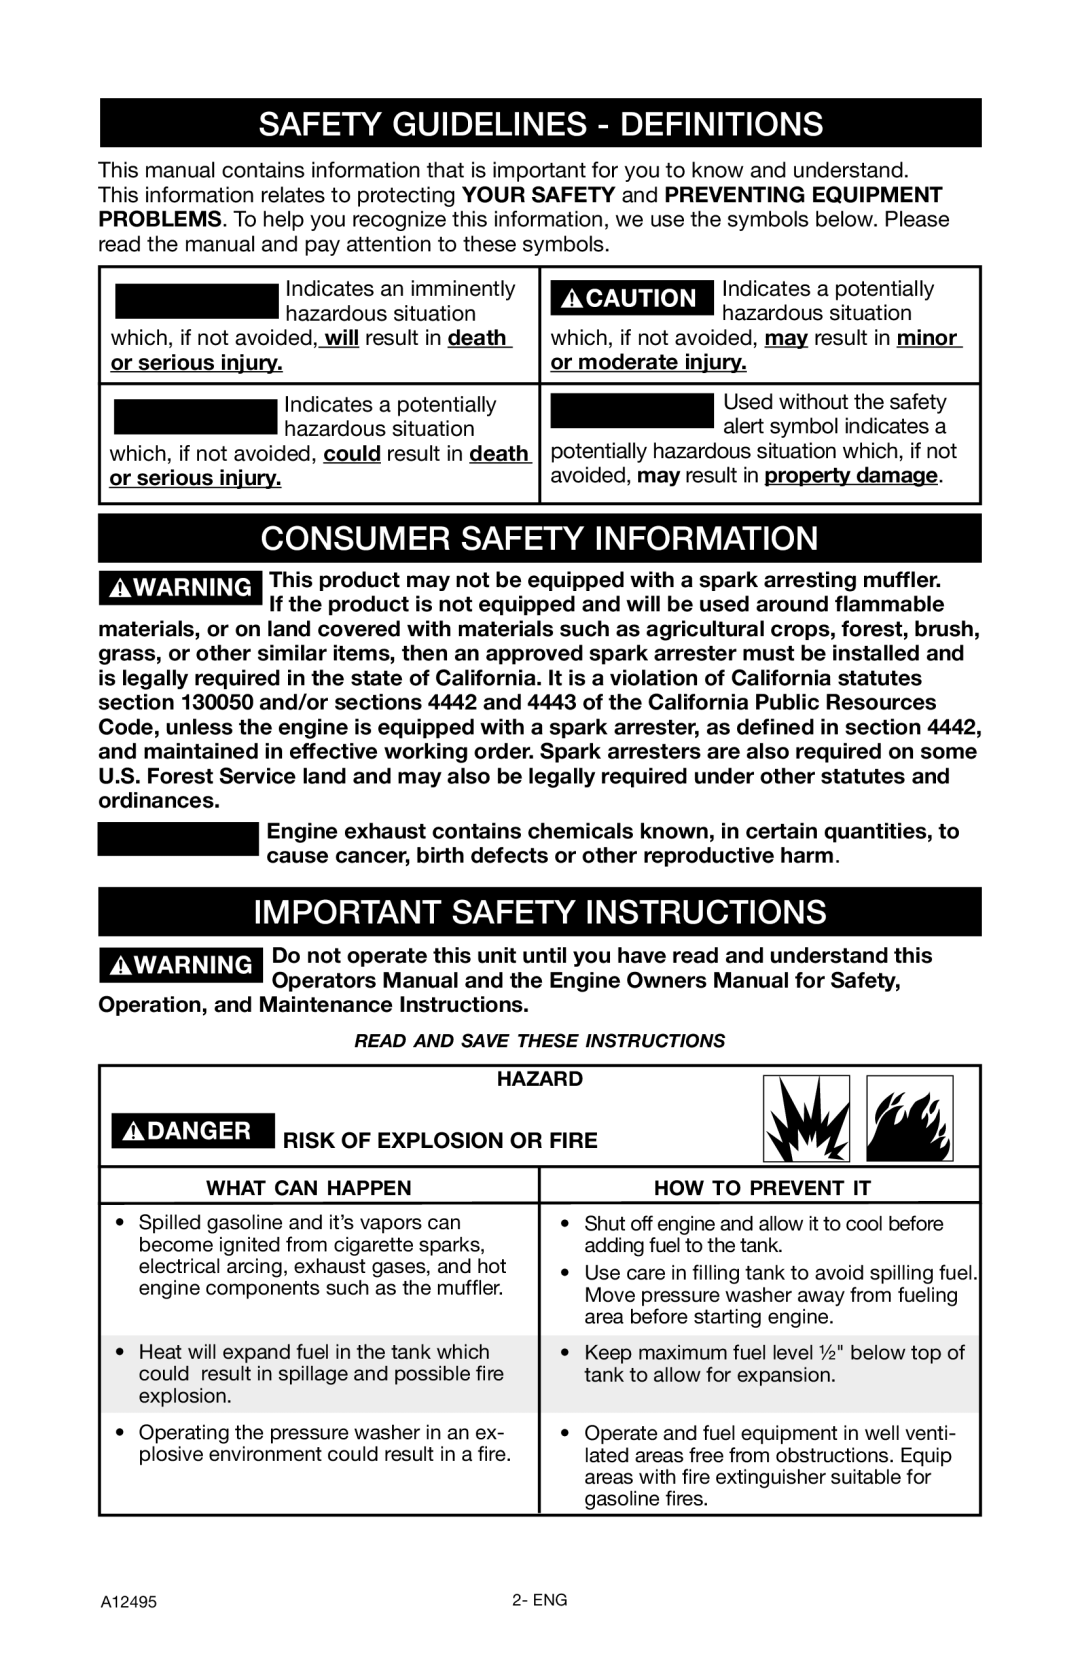 DeVillbiss Air Power Company PWH3635 Safety Guidelines - Definitions, Consumer Safety Information, Hazard, What Can Happen 